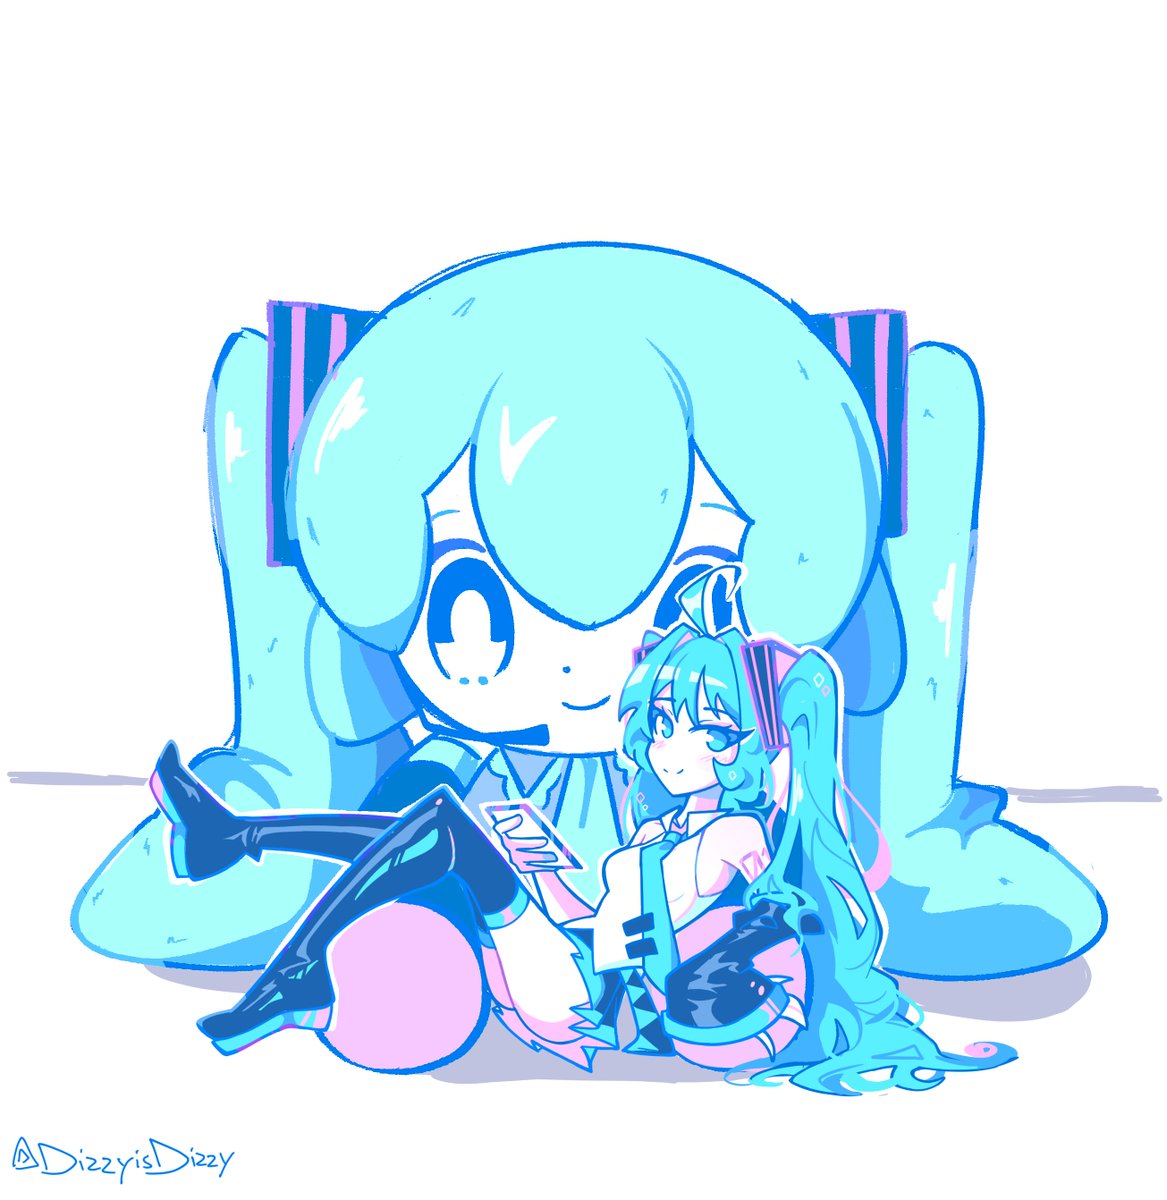 「Miku's project sekai money goes to only 」|Dizzyのイラスト